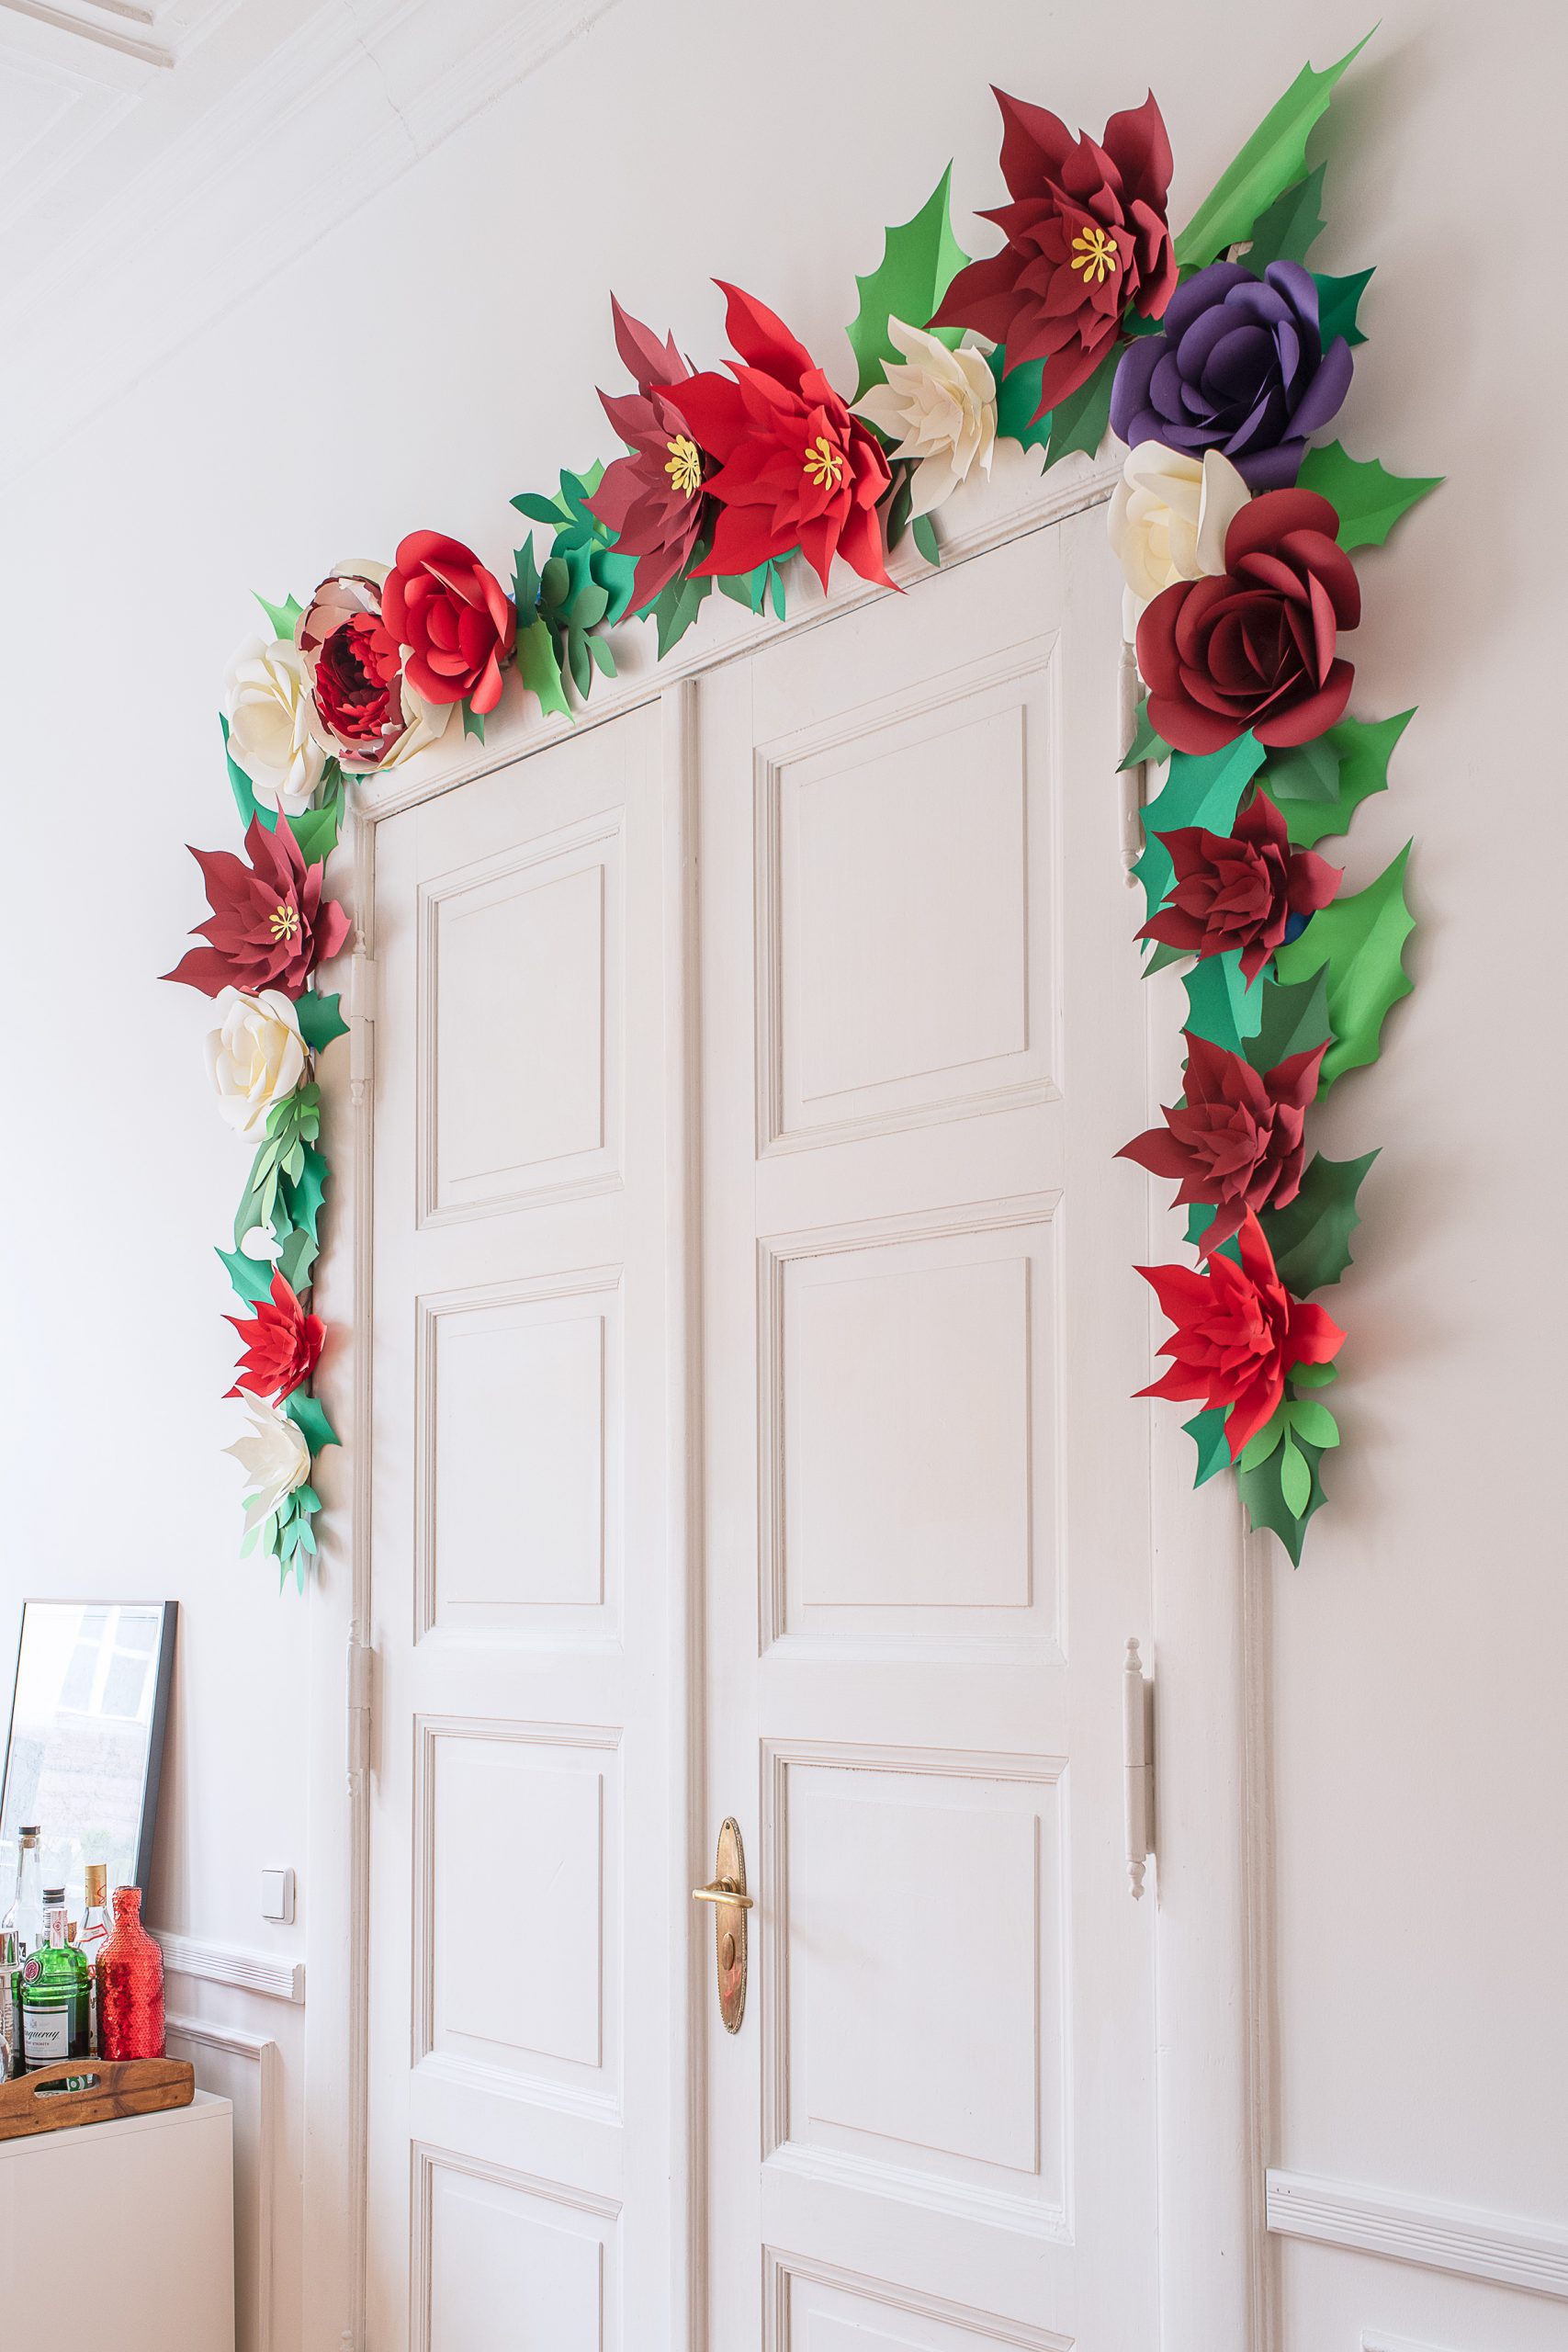 DIY Christmas Paper Flower Garland To Make Your Home Festive